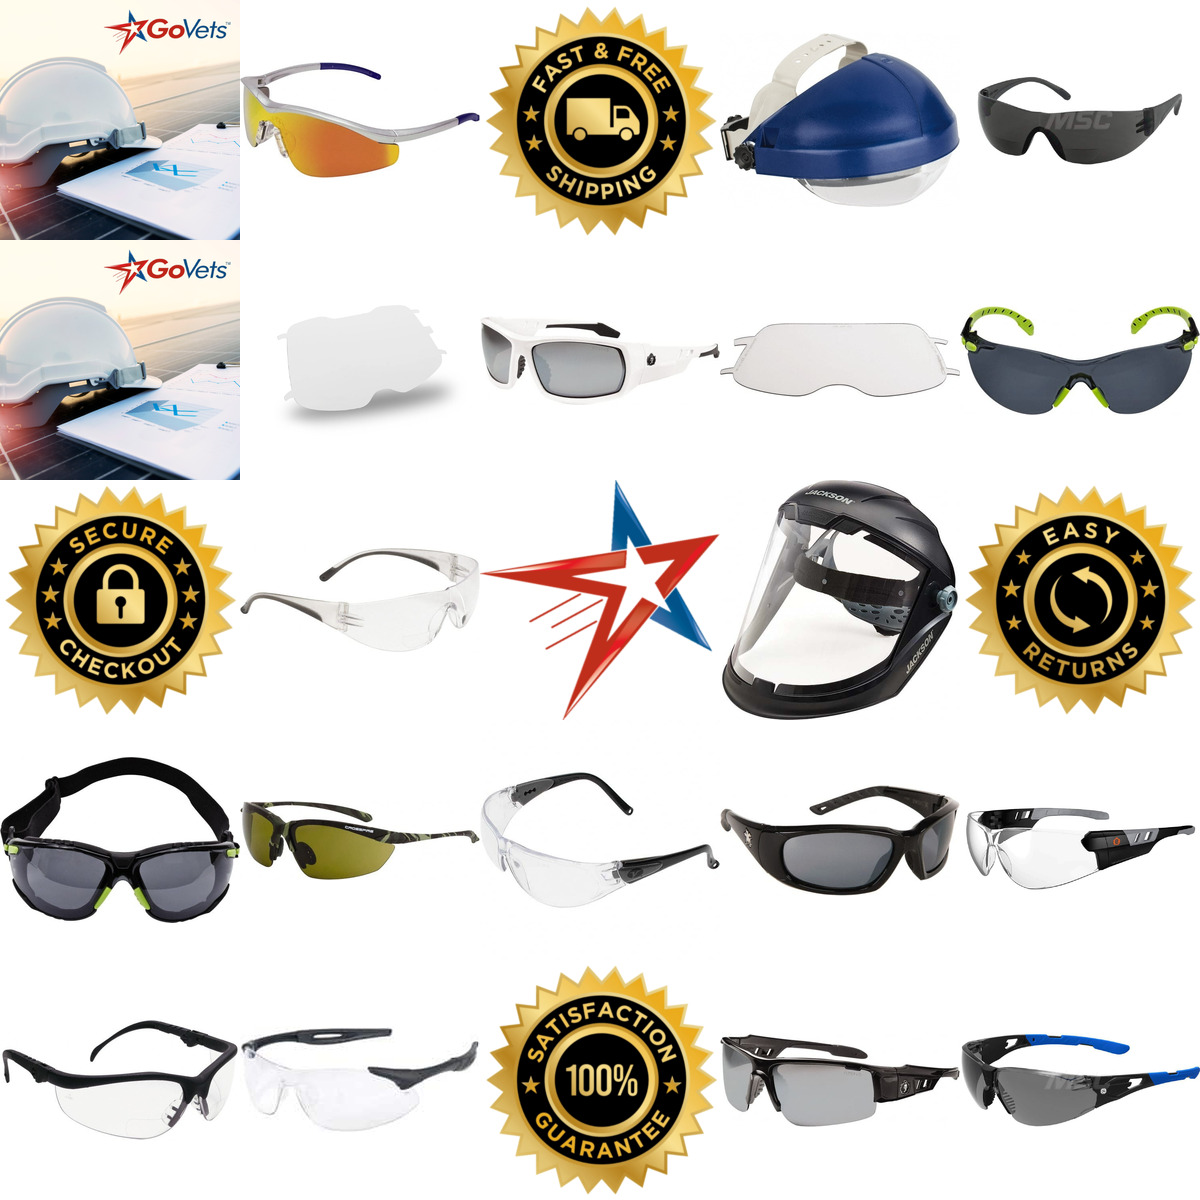 A selection of Eye and Face Protection products on GoVets